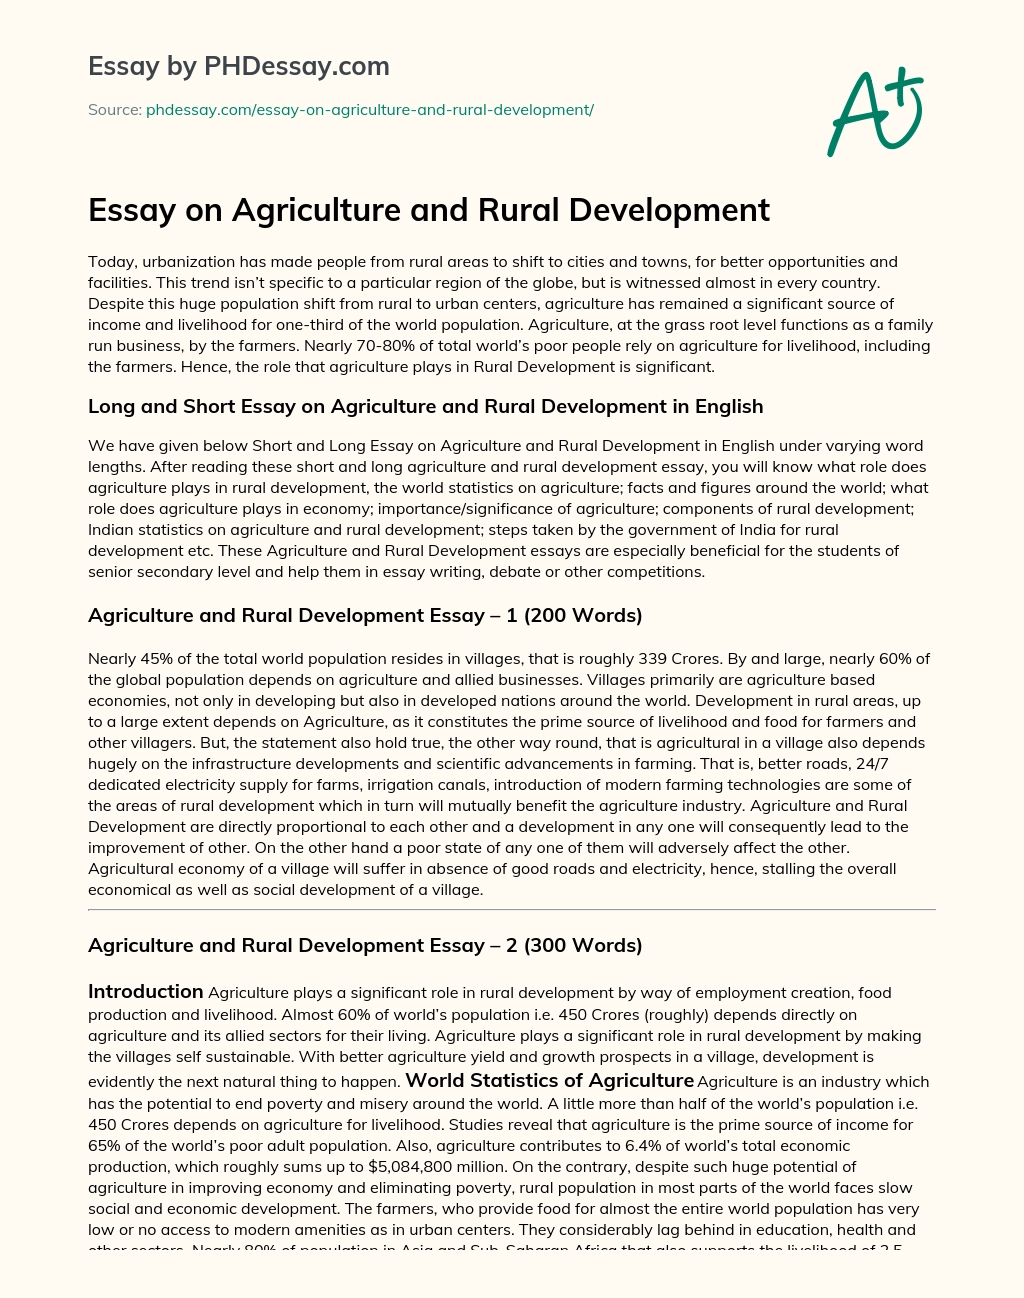 Essay on Agriculture and Rural Development essay